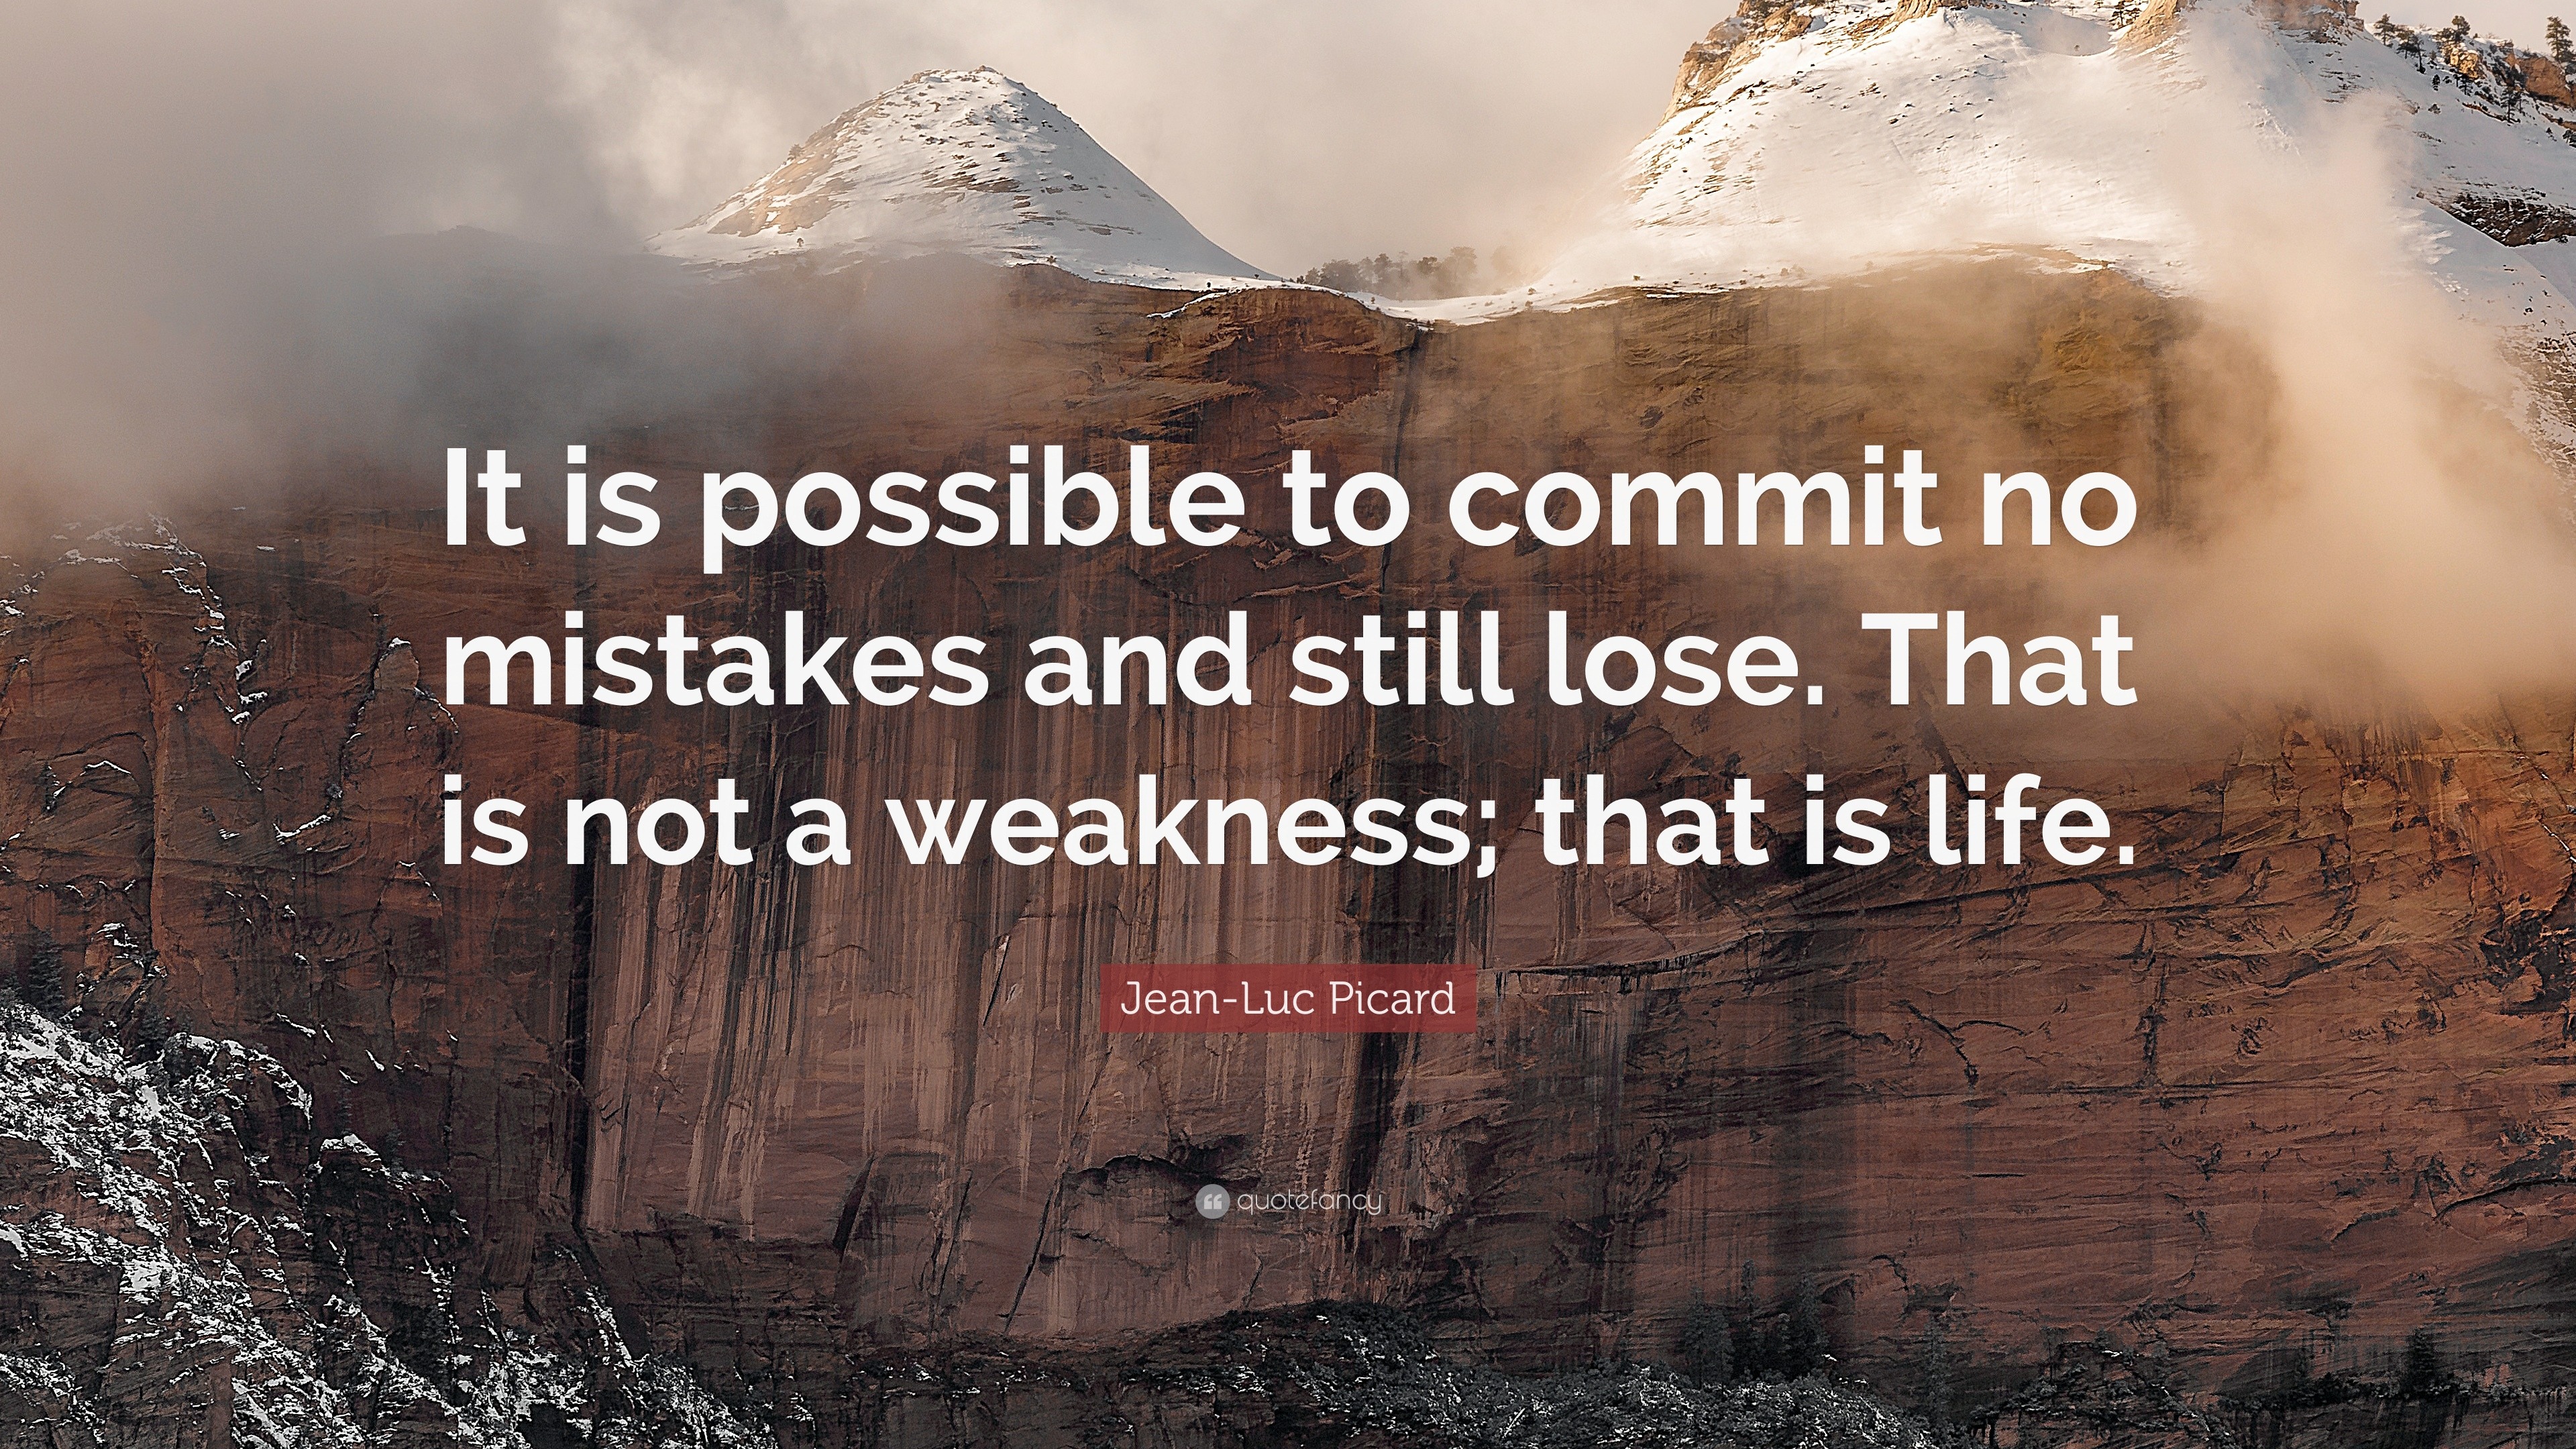 Jean-Luc Picard Quote: “It is possible to commit no mistakes and still